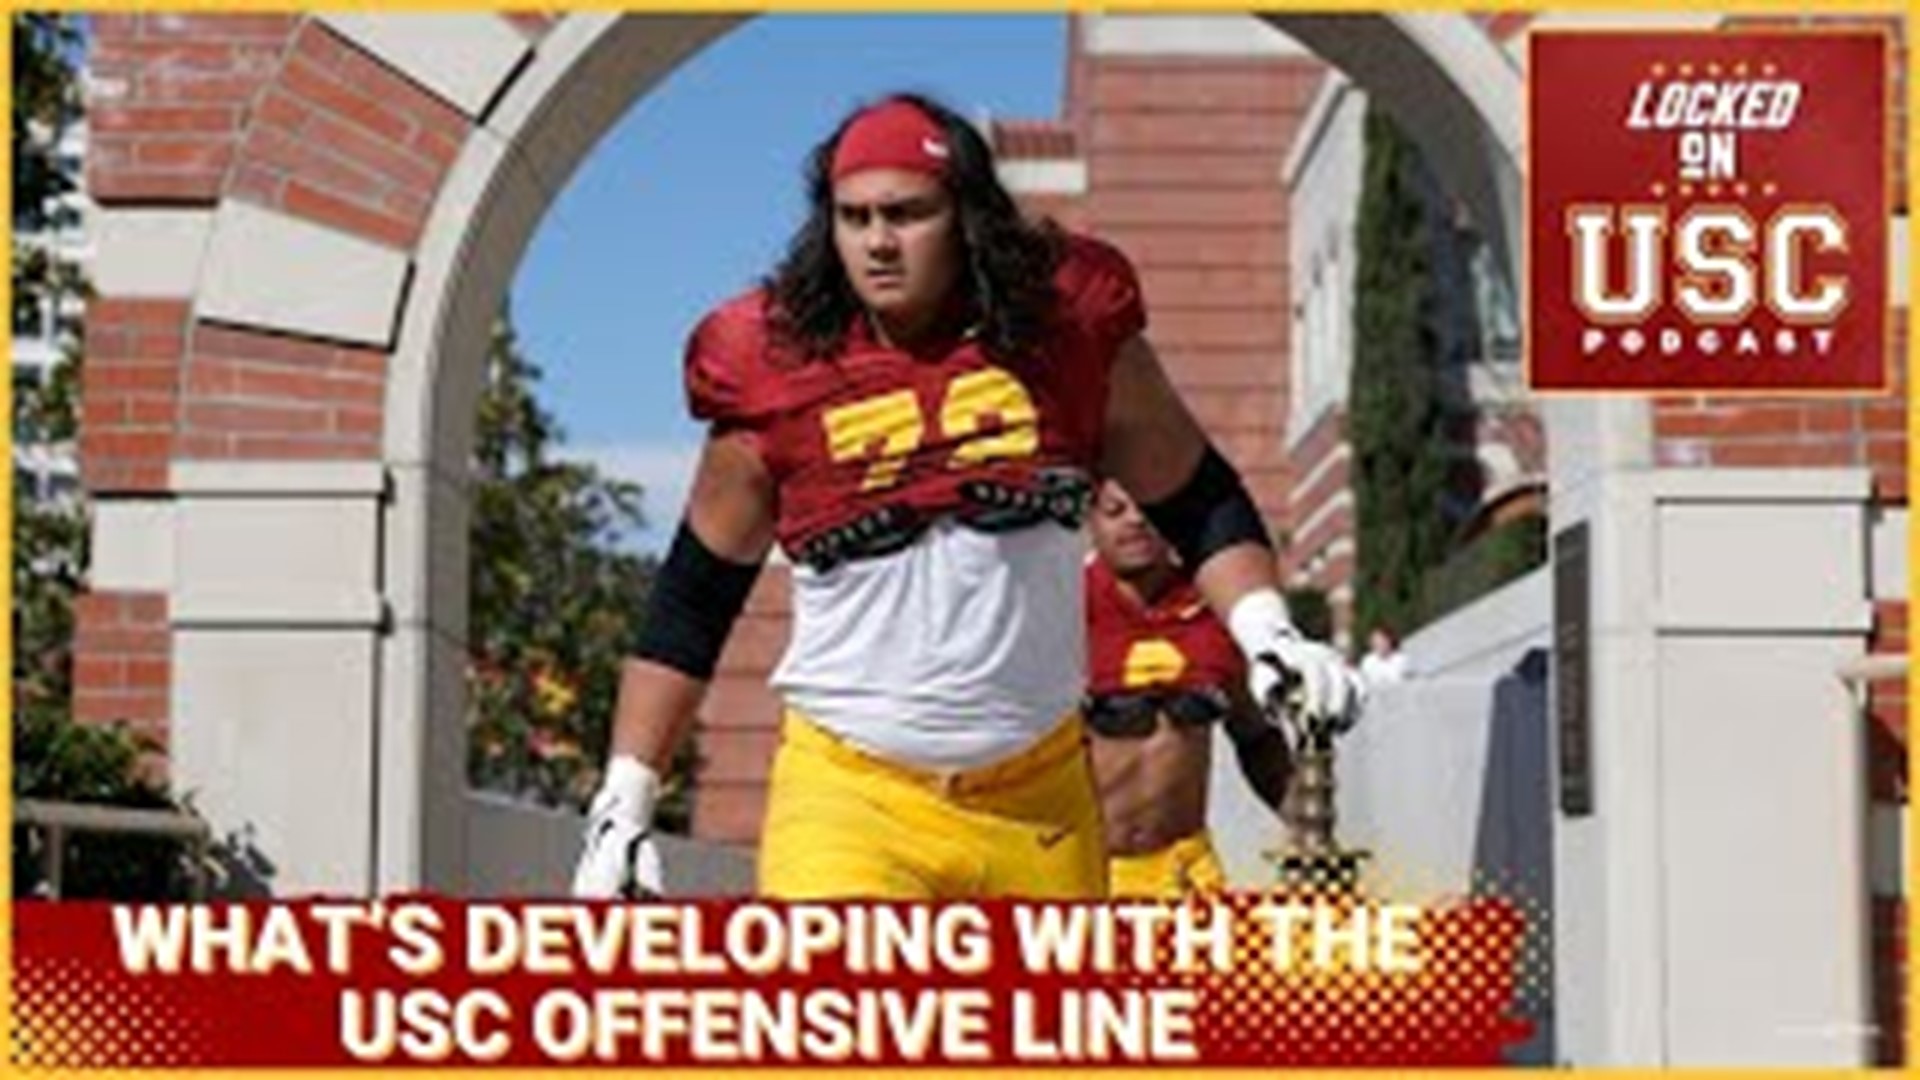 Since Lincoln Riley and JoshHenson took over USC they've recruited 10 offensive linemen from the high school ranks. But so far, there are no commits from 2025.